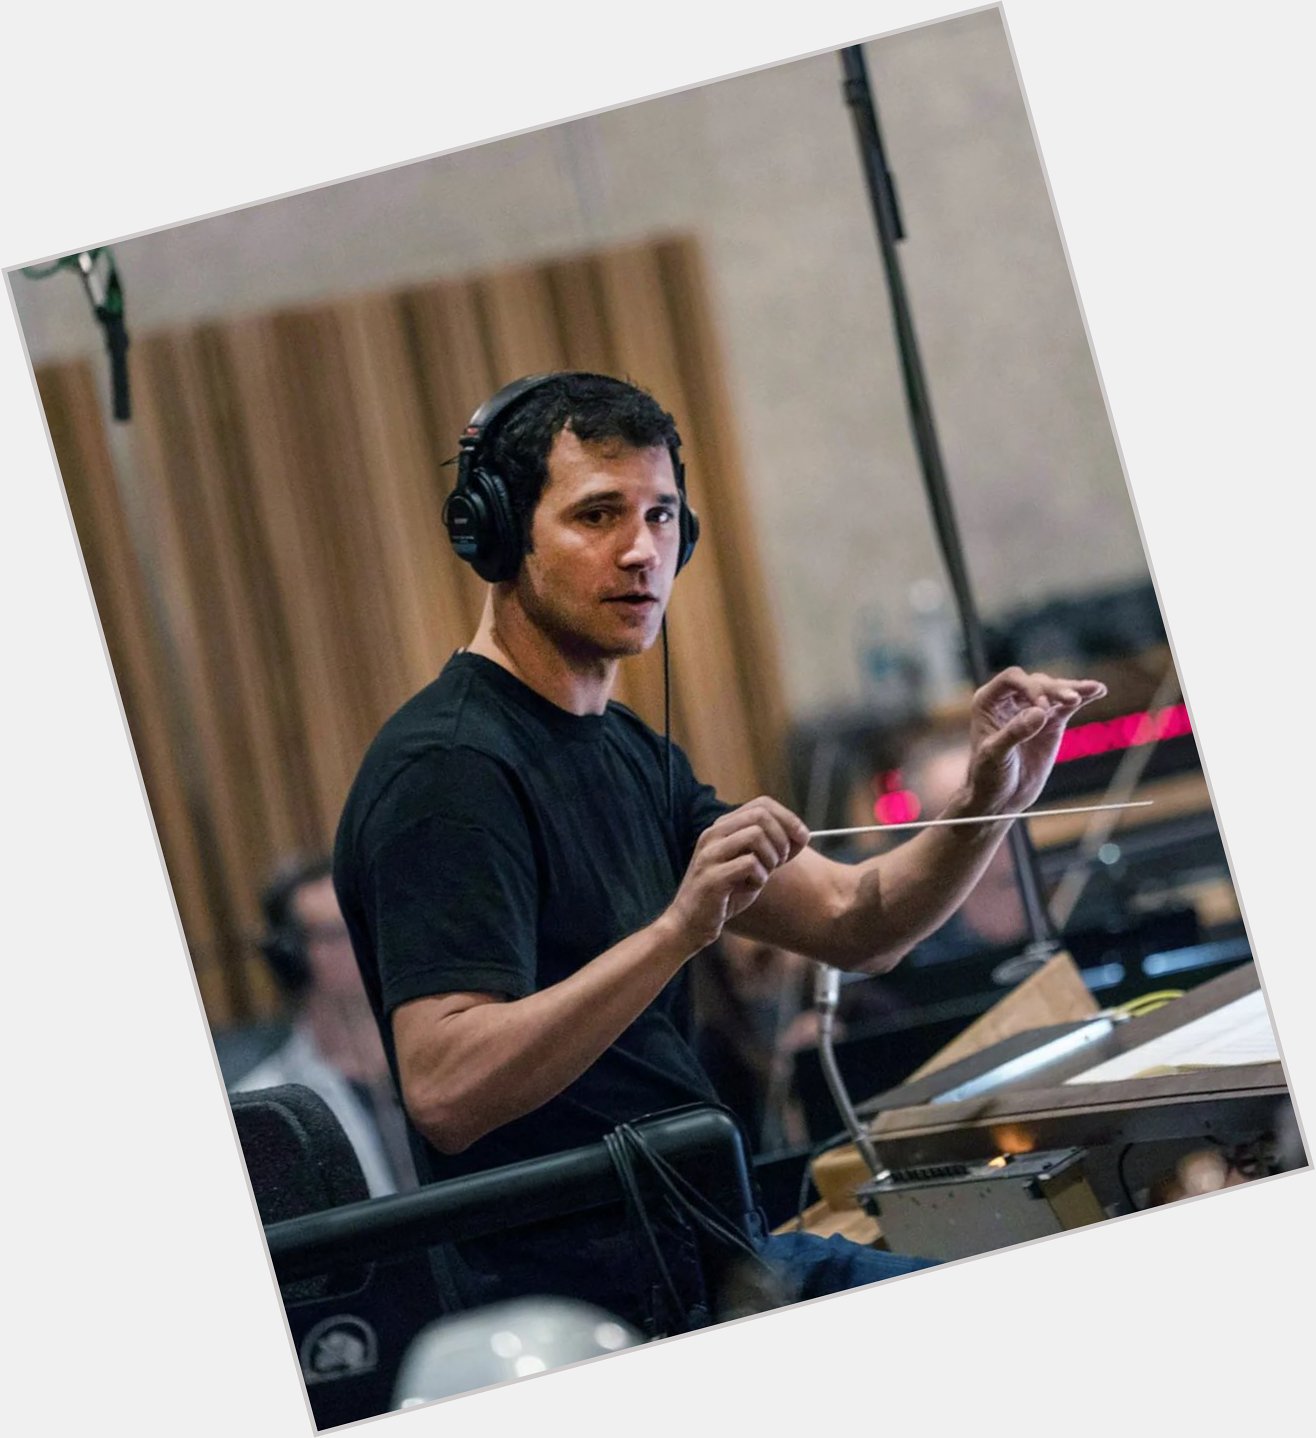 Happy birthday to the one and ONLY Ramin djawadi. May you always bless our ears with your genius work 